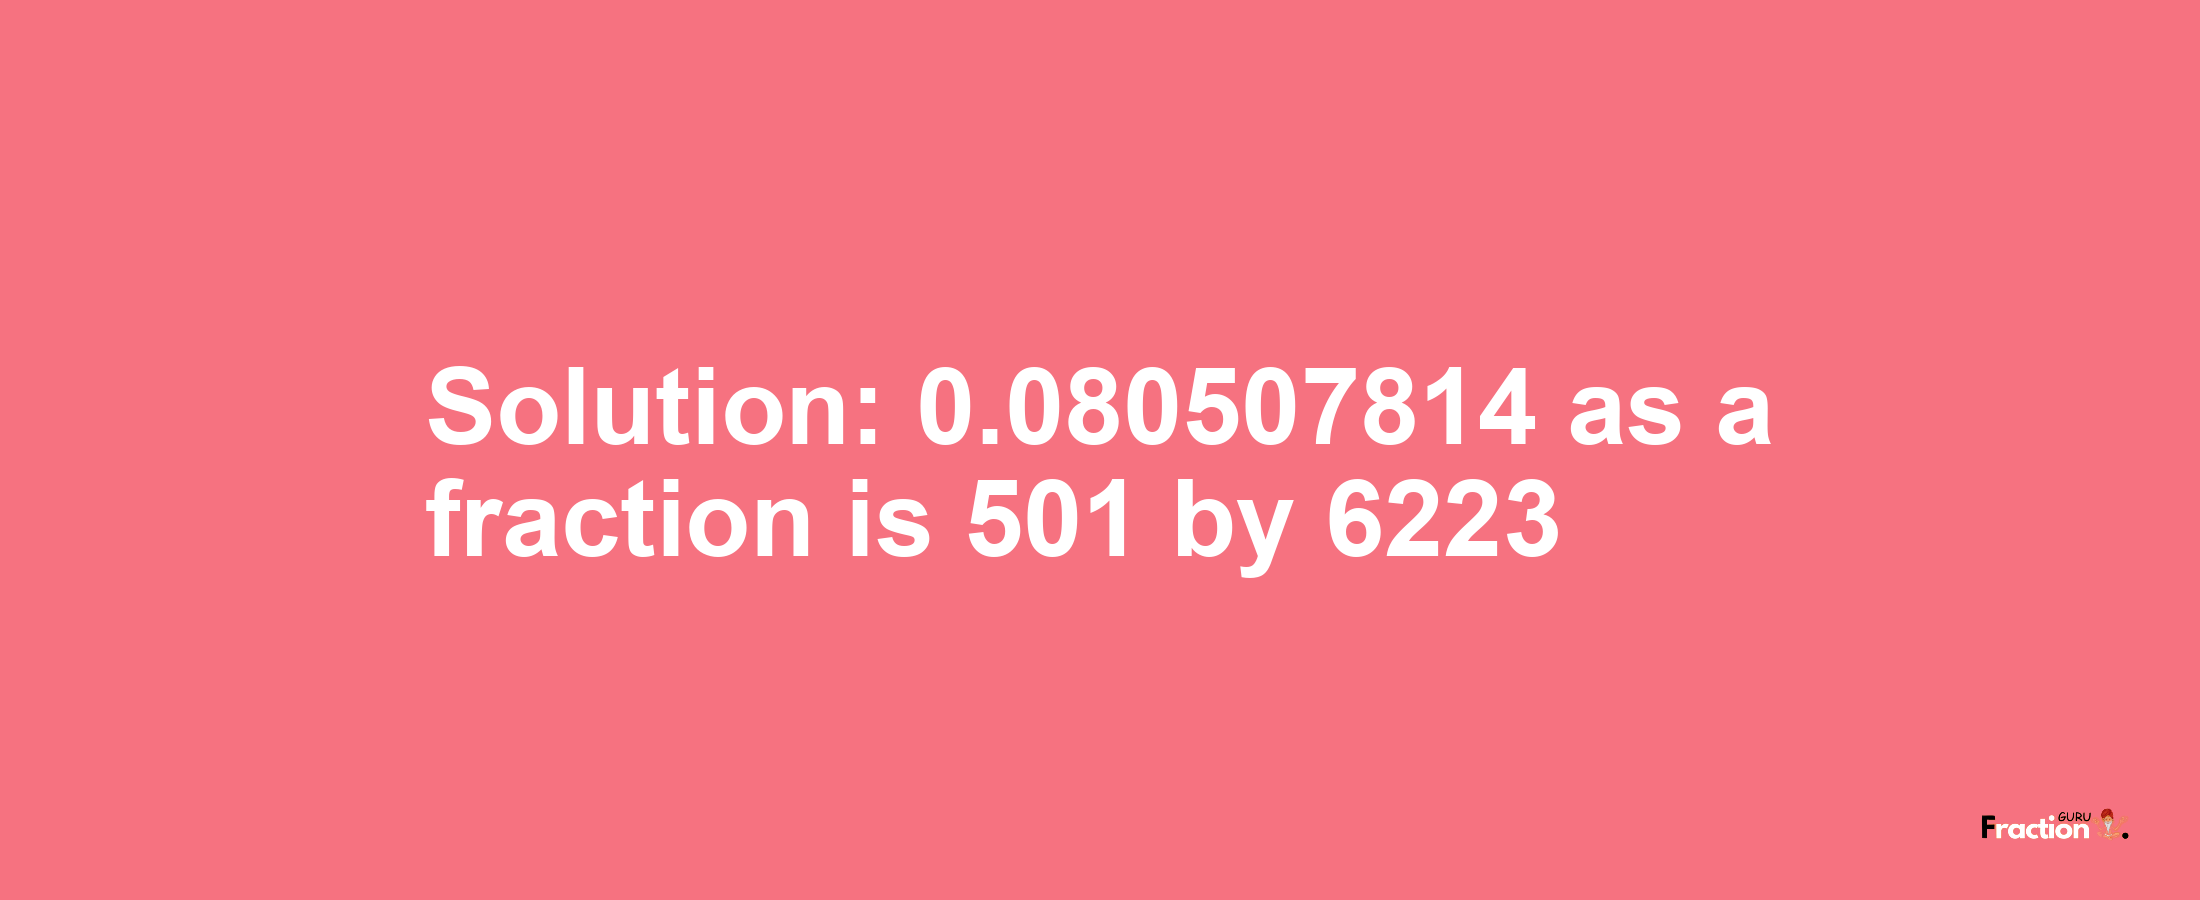 Solution:0.080507814 as a fraction is 501/6223